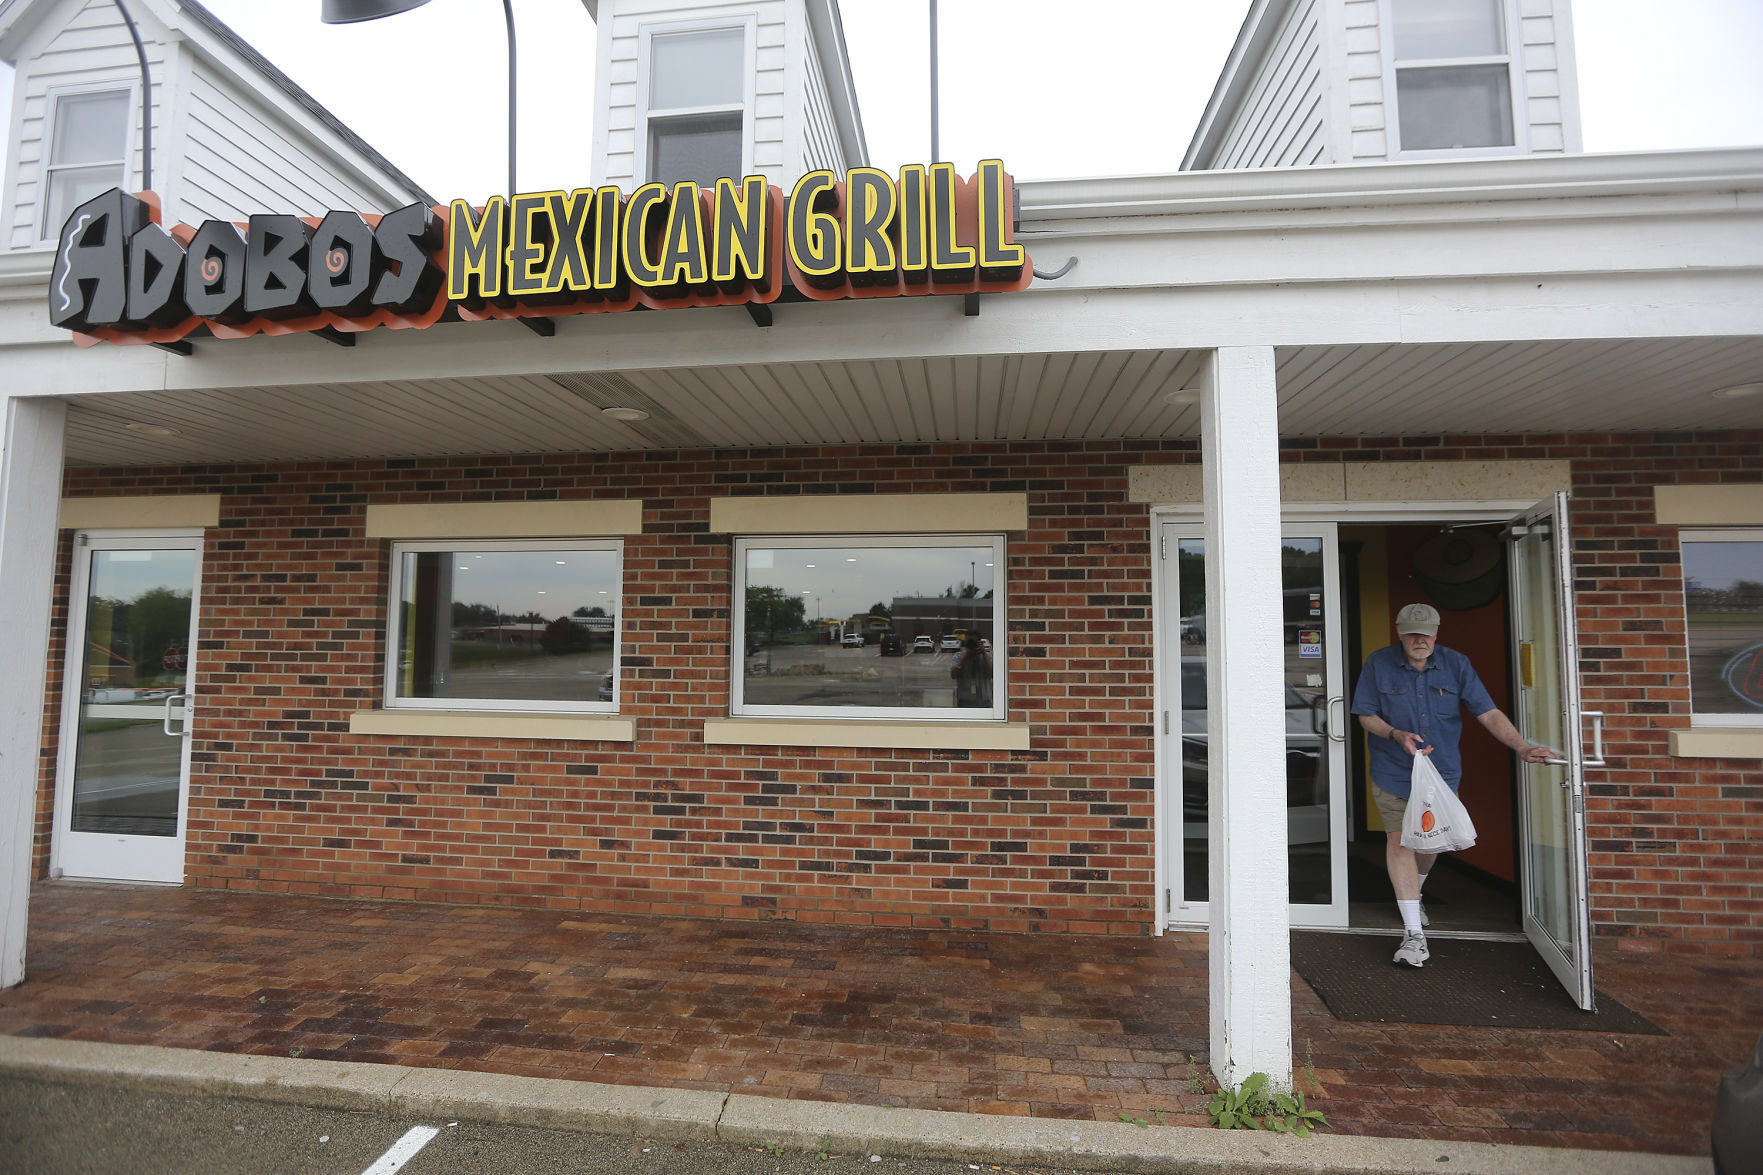 A customer exits Adobos Mexican Grill in Galena, Ill. recently.    PHOTO CREDIT: Dave Kettering